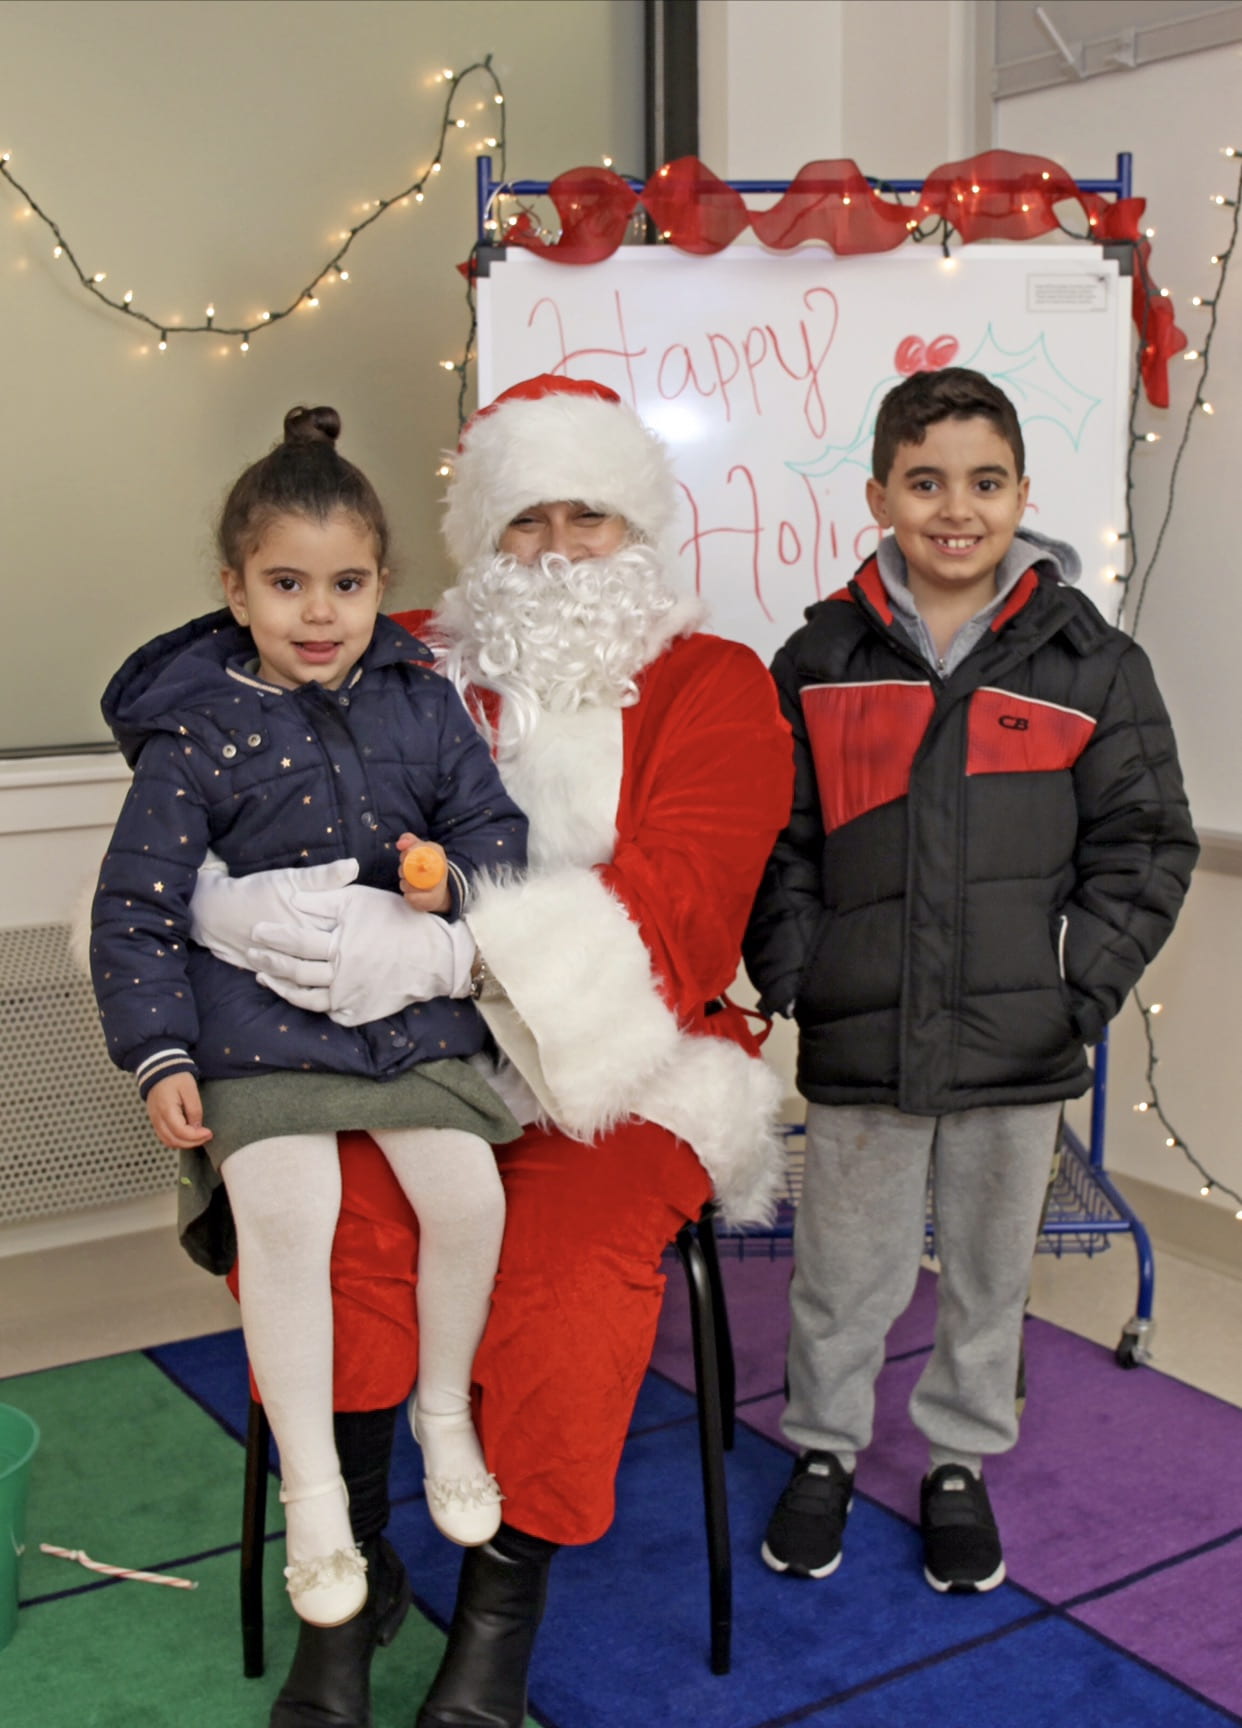 Students taking pictures with Santa Claus at the holiday fair.